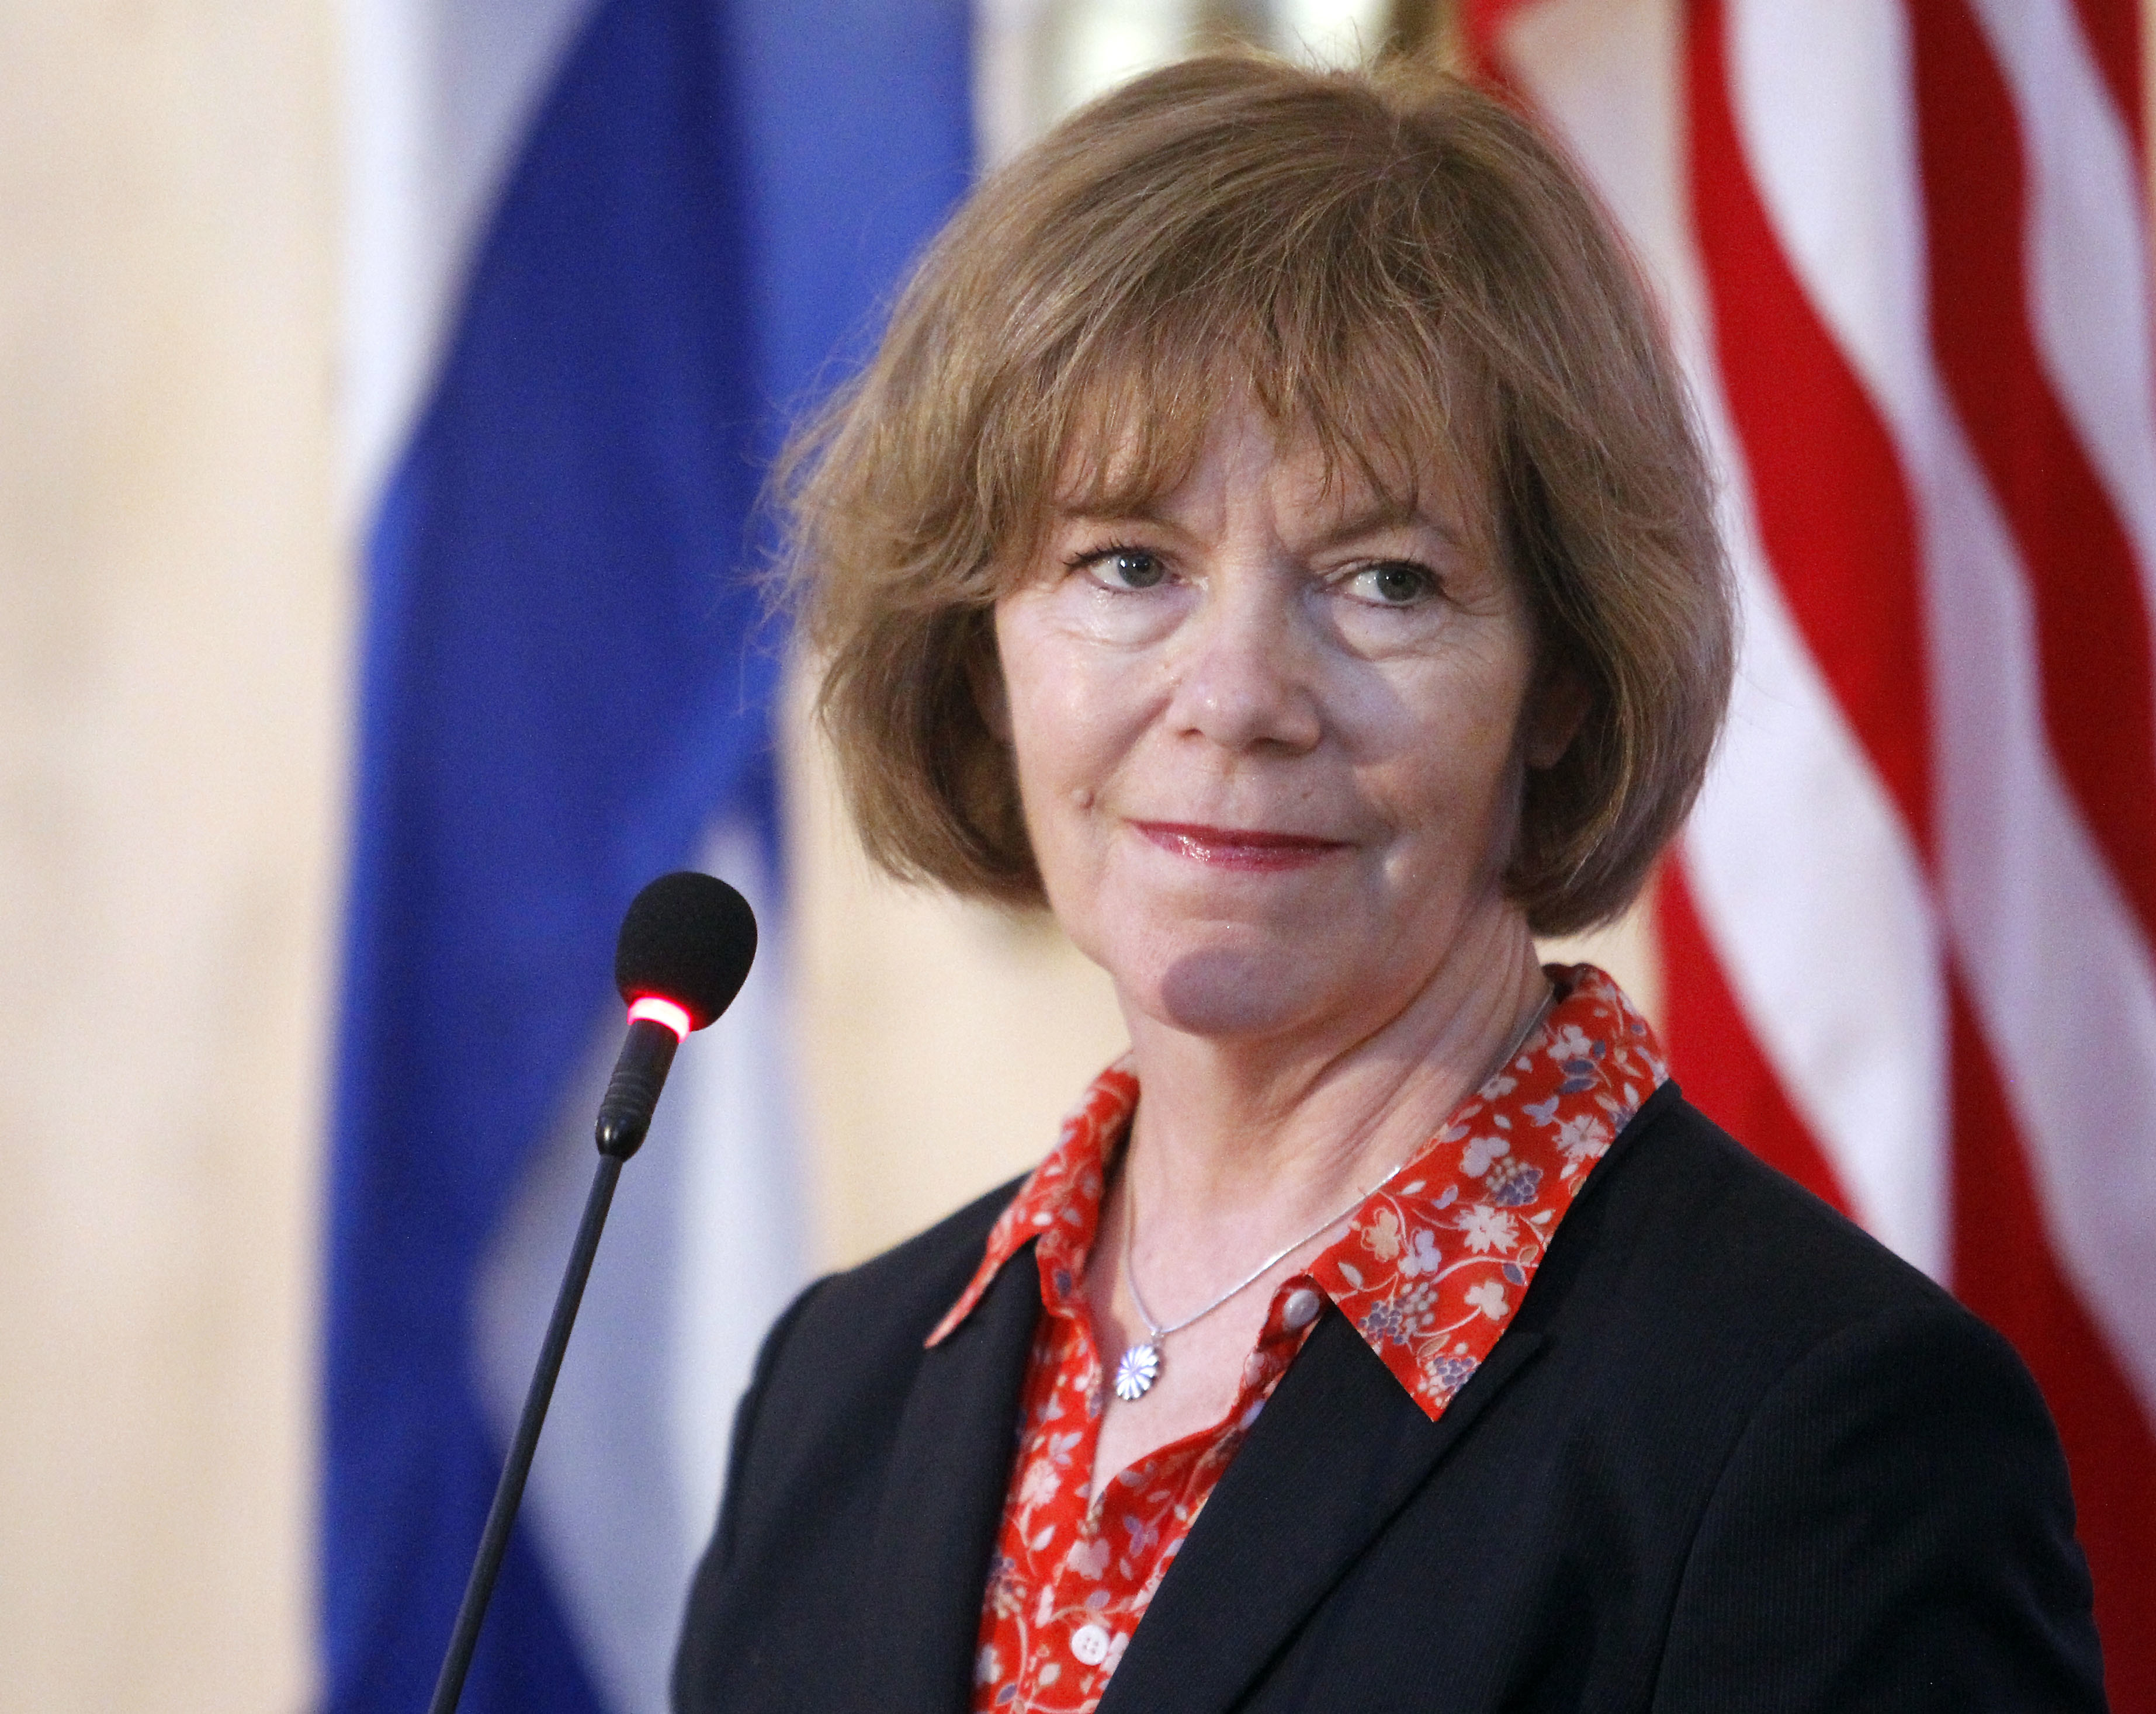 Tina Smith, Vice Governor of Minnesota looks on during a press conference as part of her official visit on June 22, 2017 in Havanna, Cuba. (Mastrafoto/CON—LatinContent/Getty Images)